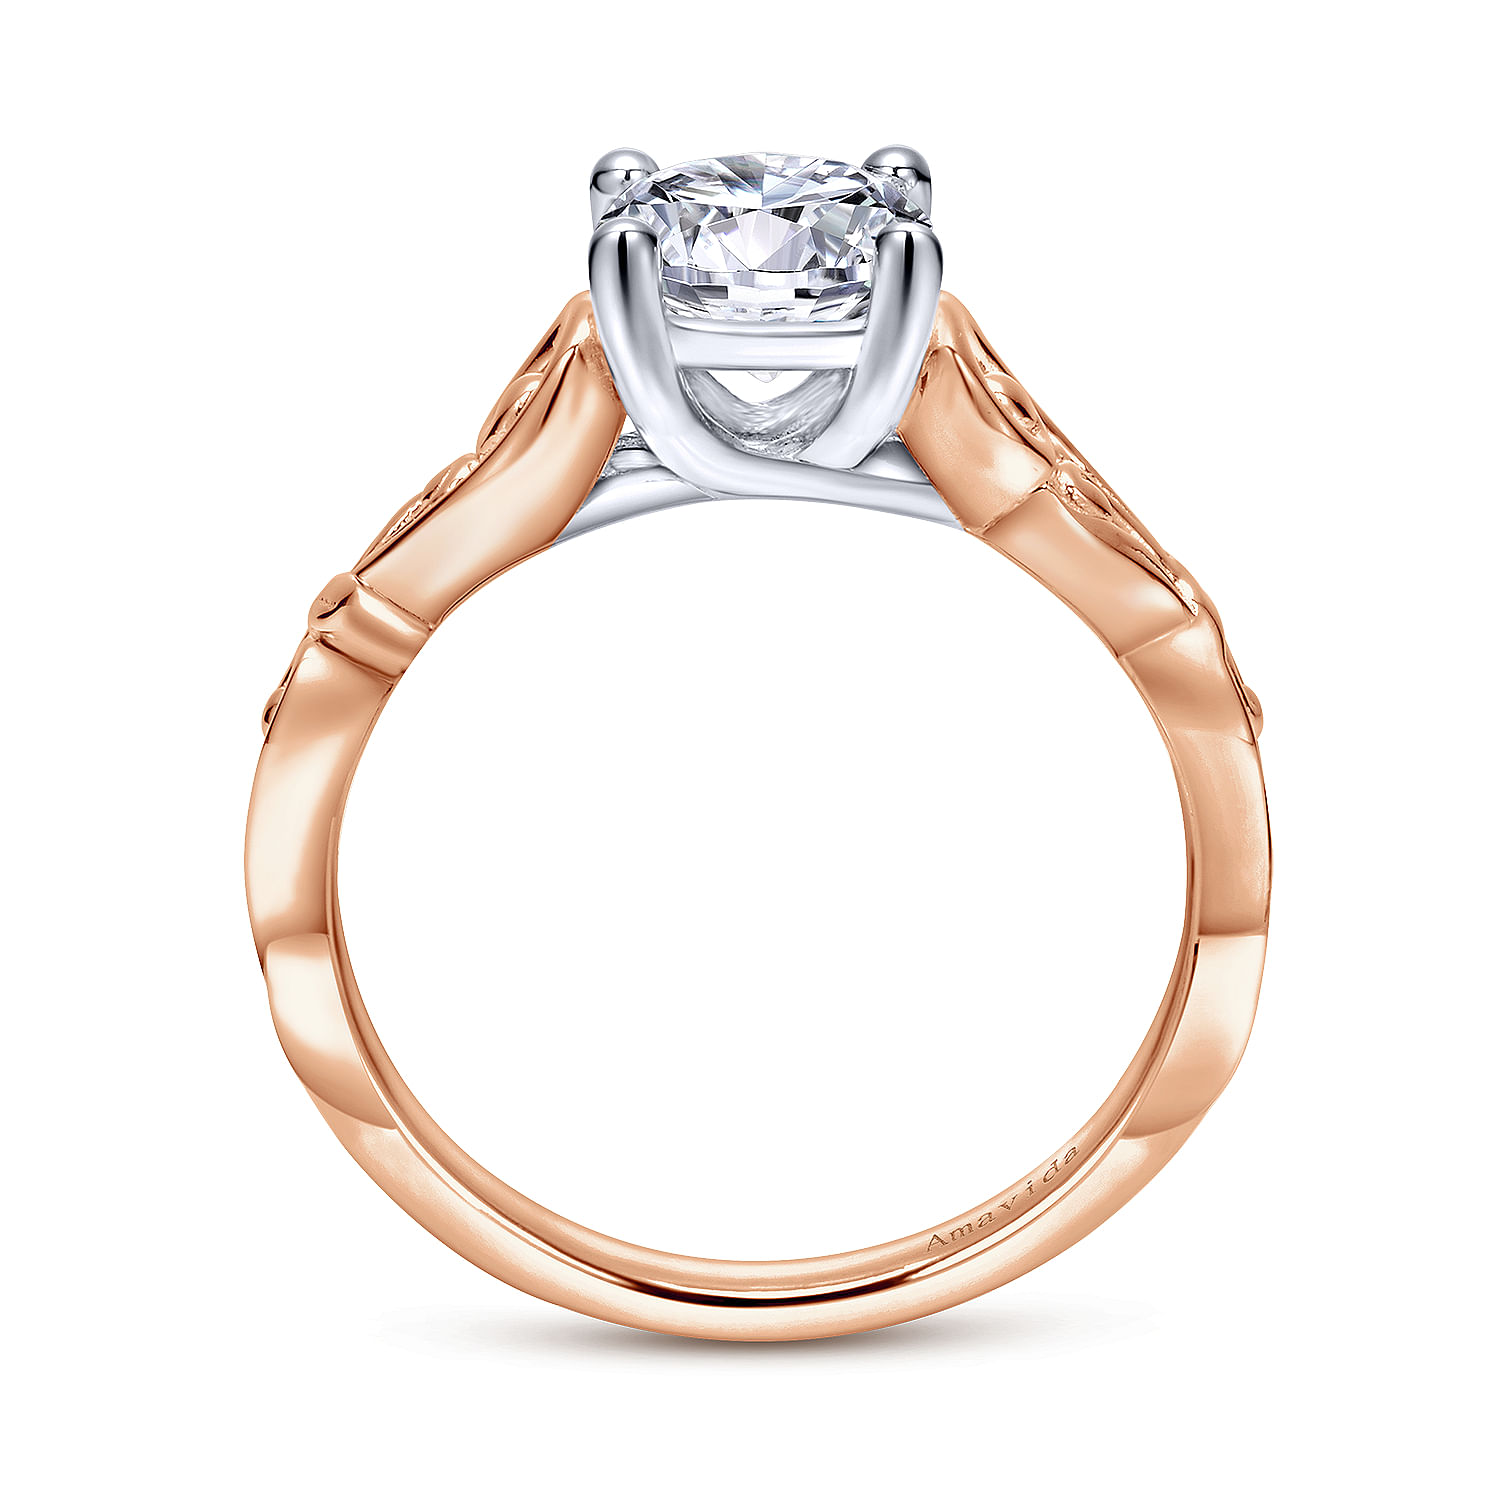 Vintage Inspired 18K White-Rose Gold Round Solitaire Engagement Ring